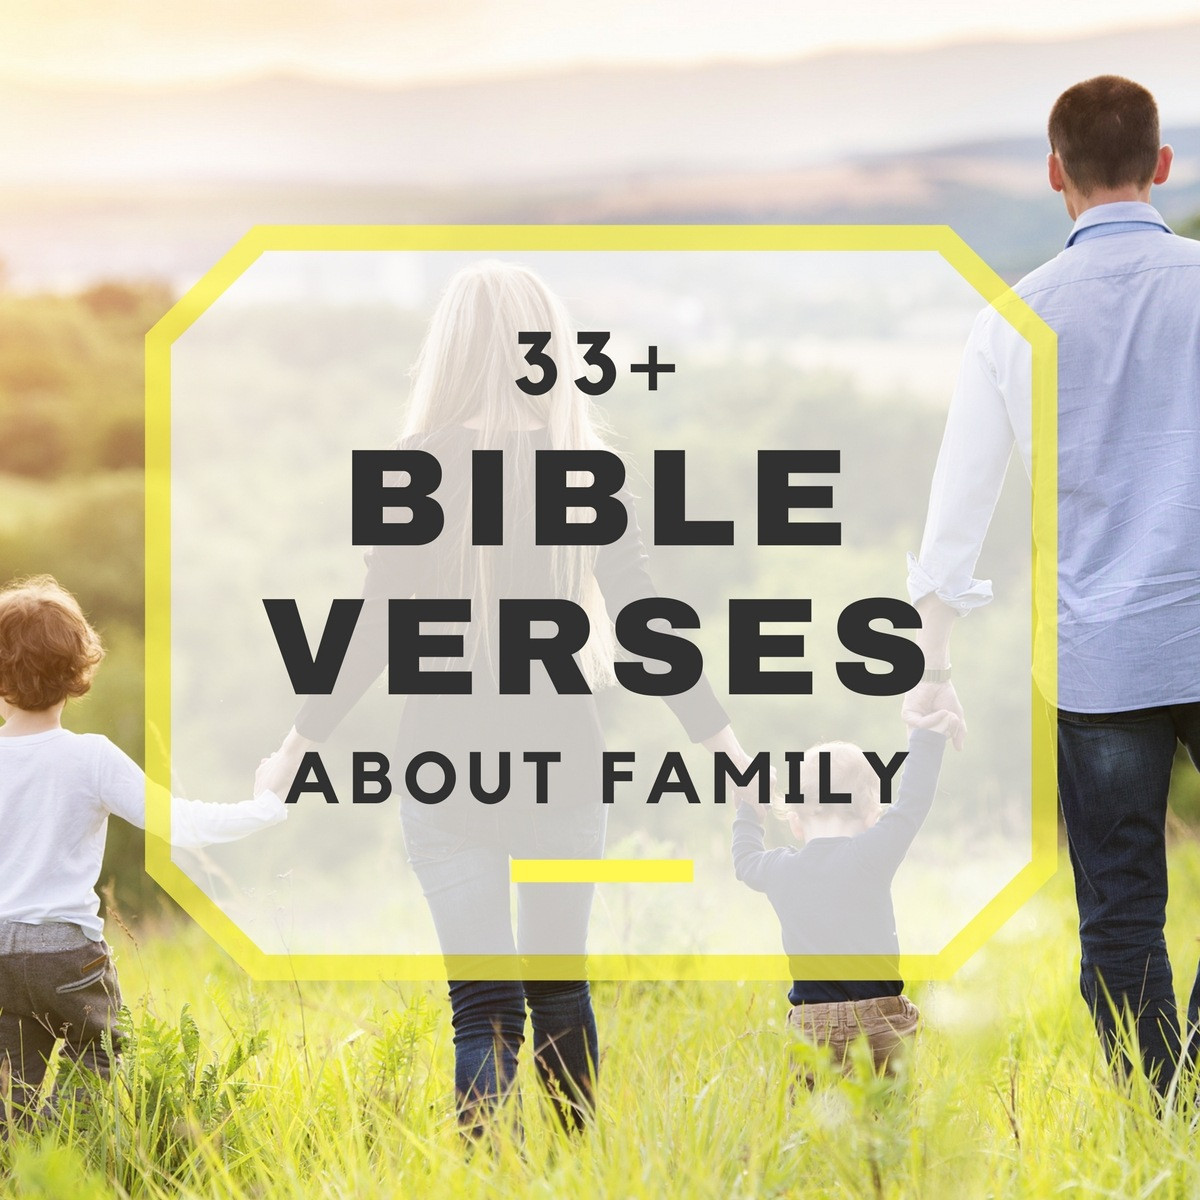 Scripture Quotes About Family
 33 Bible Verses About Family Bible Scriptures About